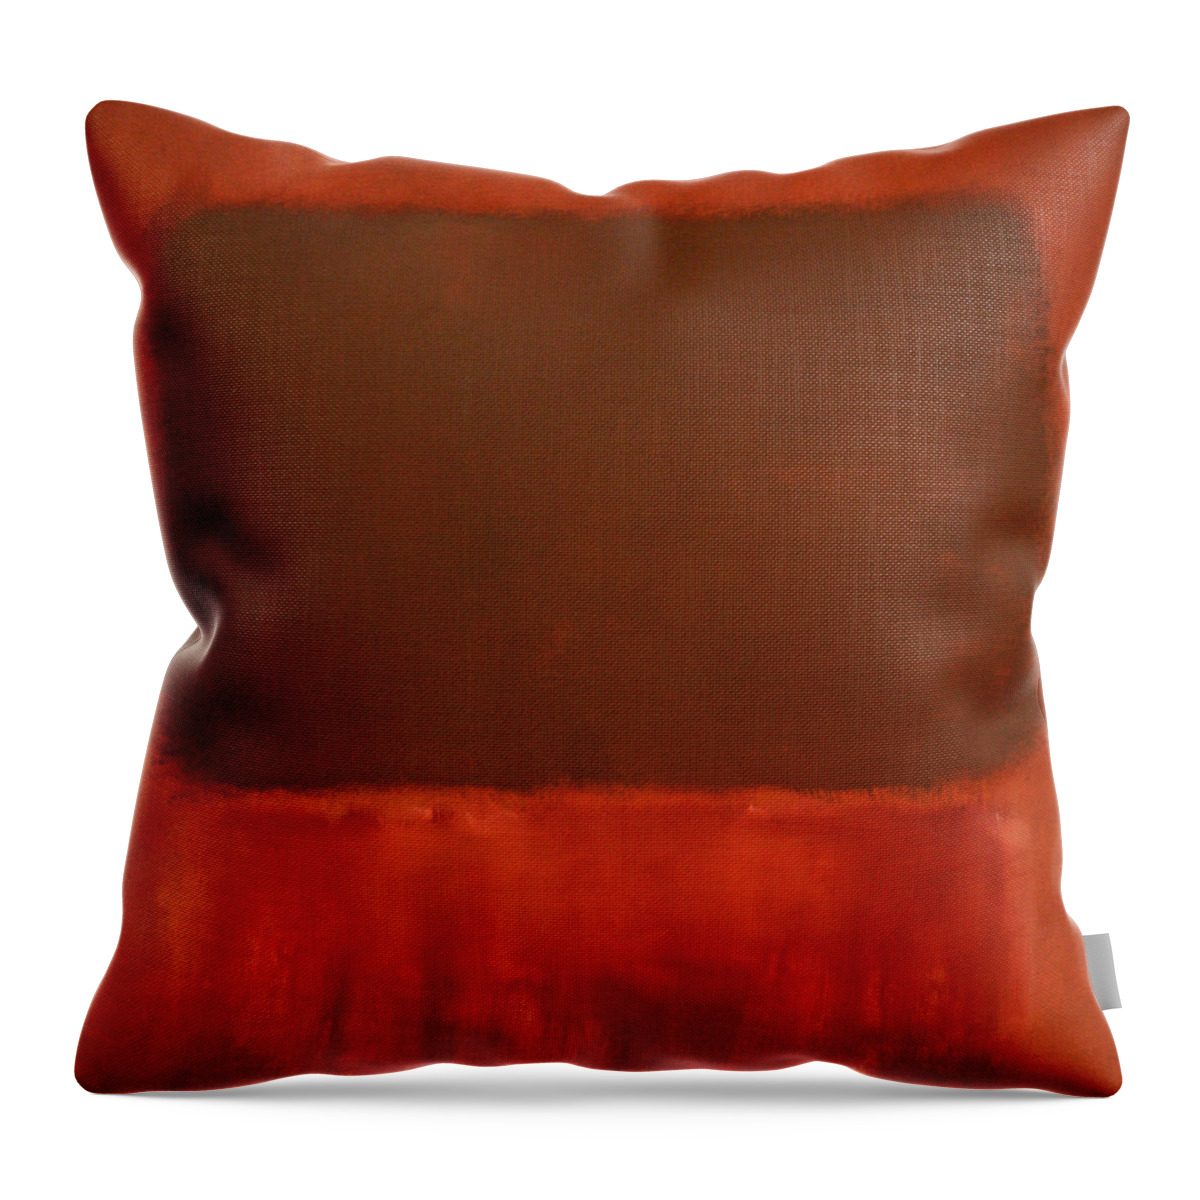 Mulberry Throw Pillow featuring the photograph Rothko's Mulberry And Brown by Cora Wandel